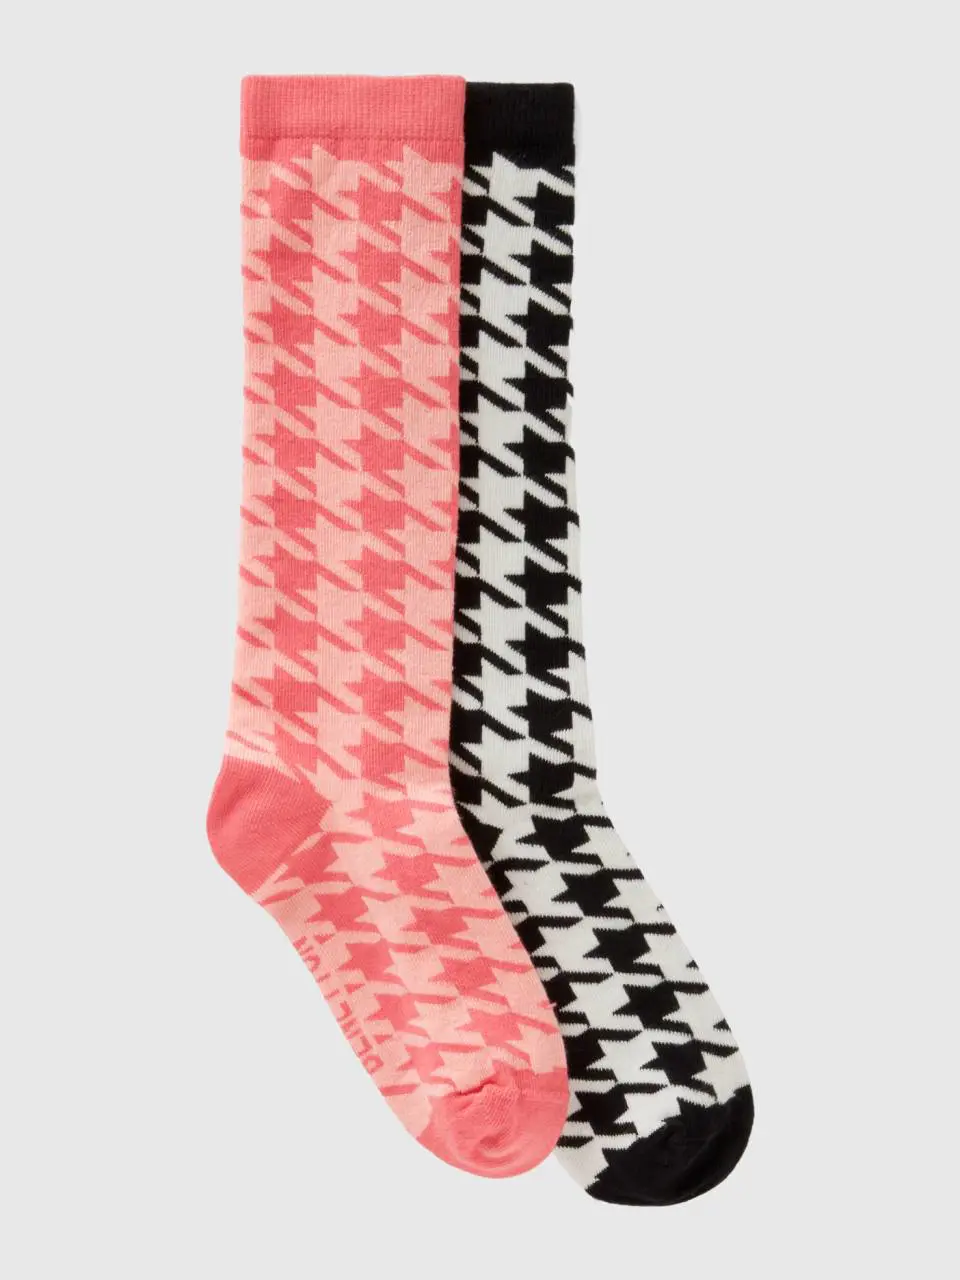 Benetton two pairs of jacquard houndstooth socks. 1